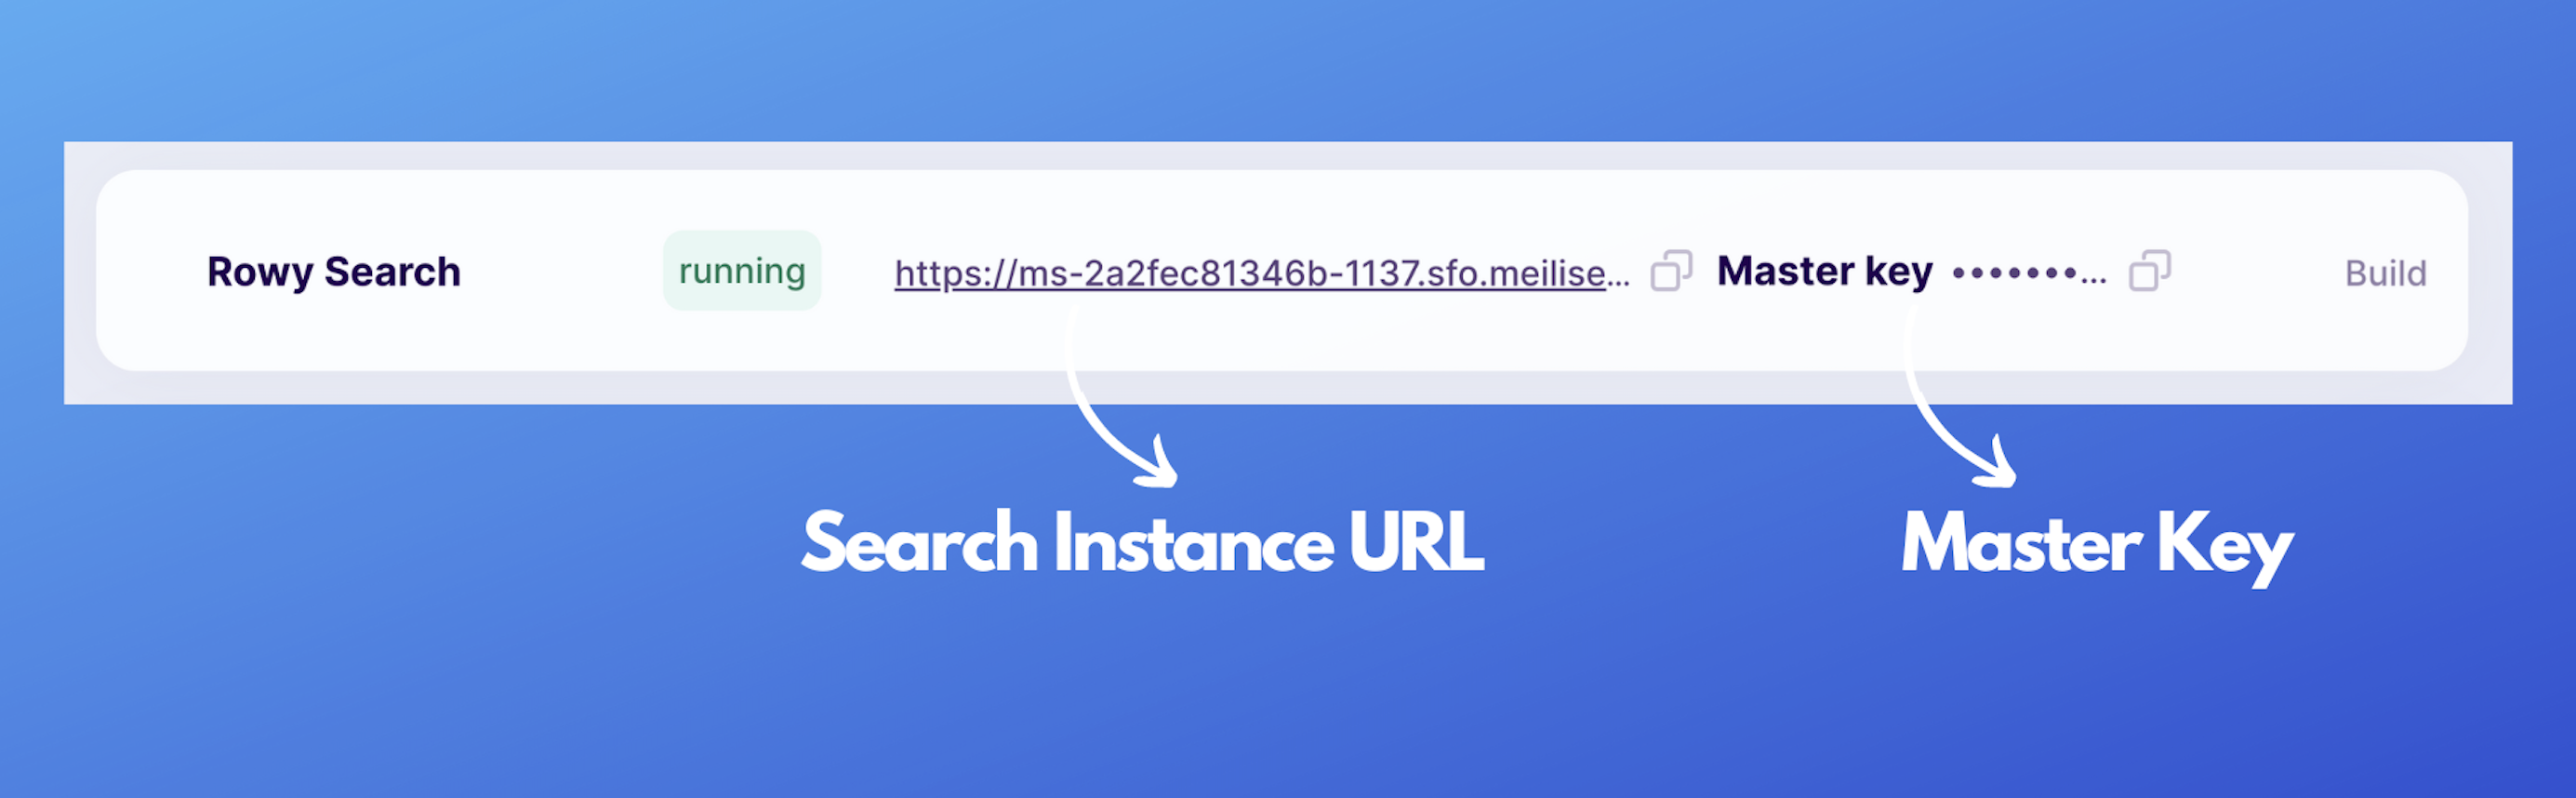 A screenshot showing the search instance URL and the master key.